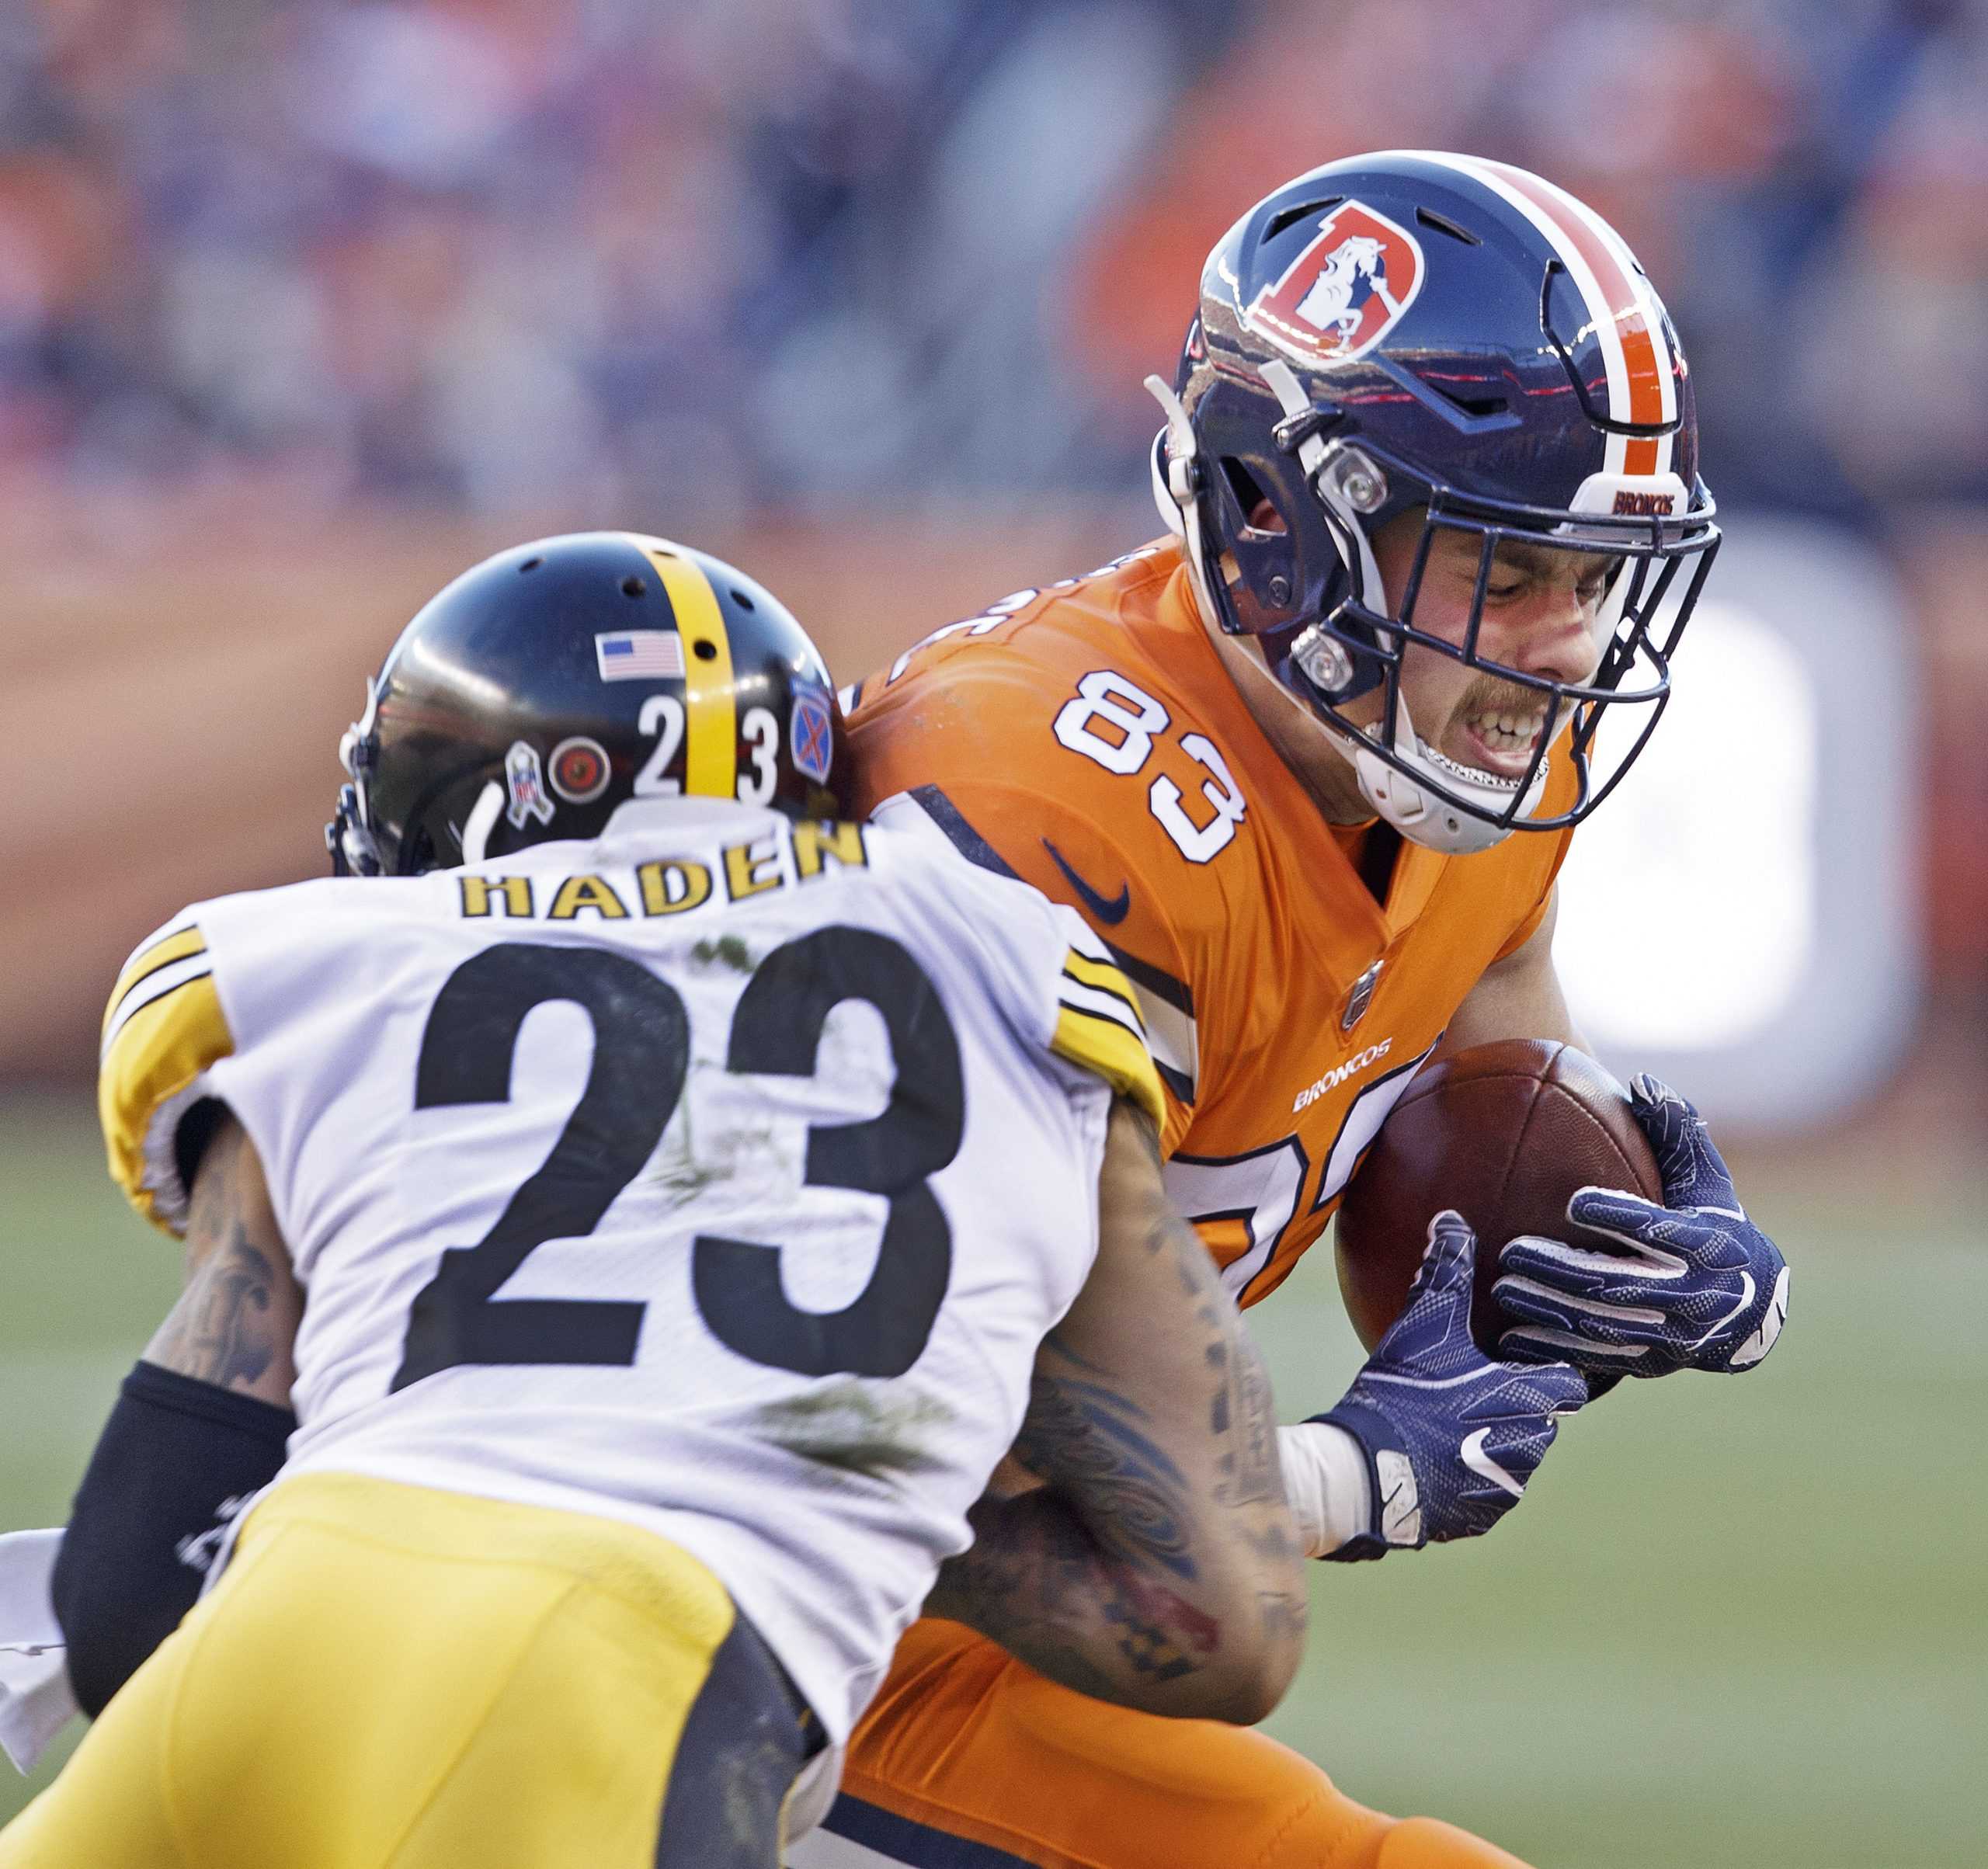 Broncos TE Matt LaCosse, right, catches a pass with Steelers CB Joe Haden, left, during the 2nd half at Broncos Stadium at Mile High Sunday afternoon. (Hector Acevedo/ZUMA Wire/TNS)